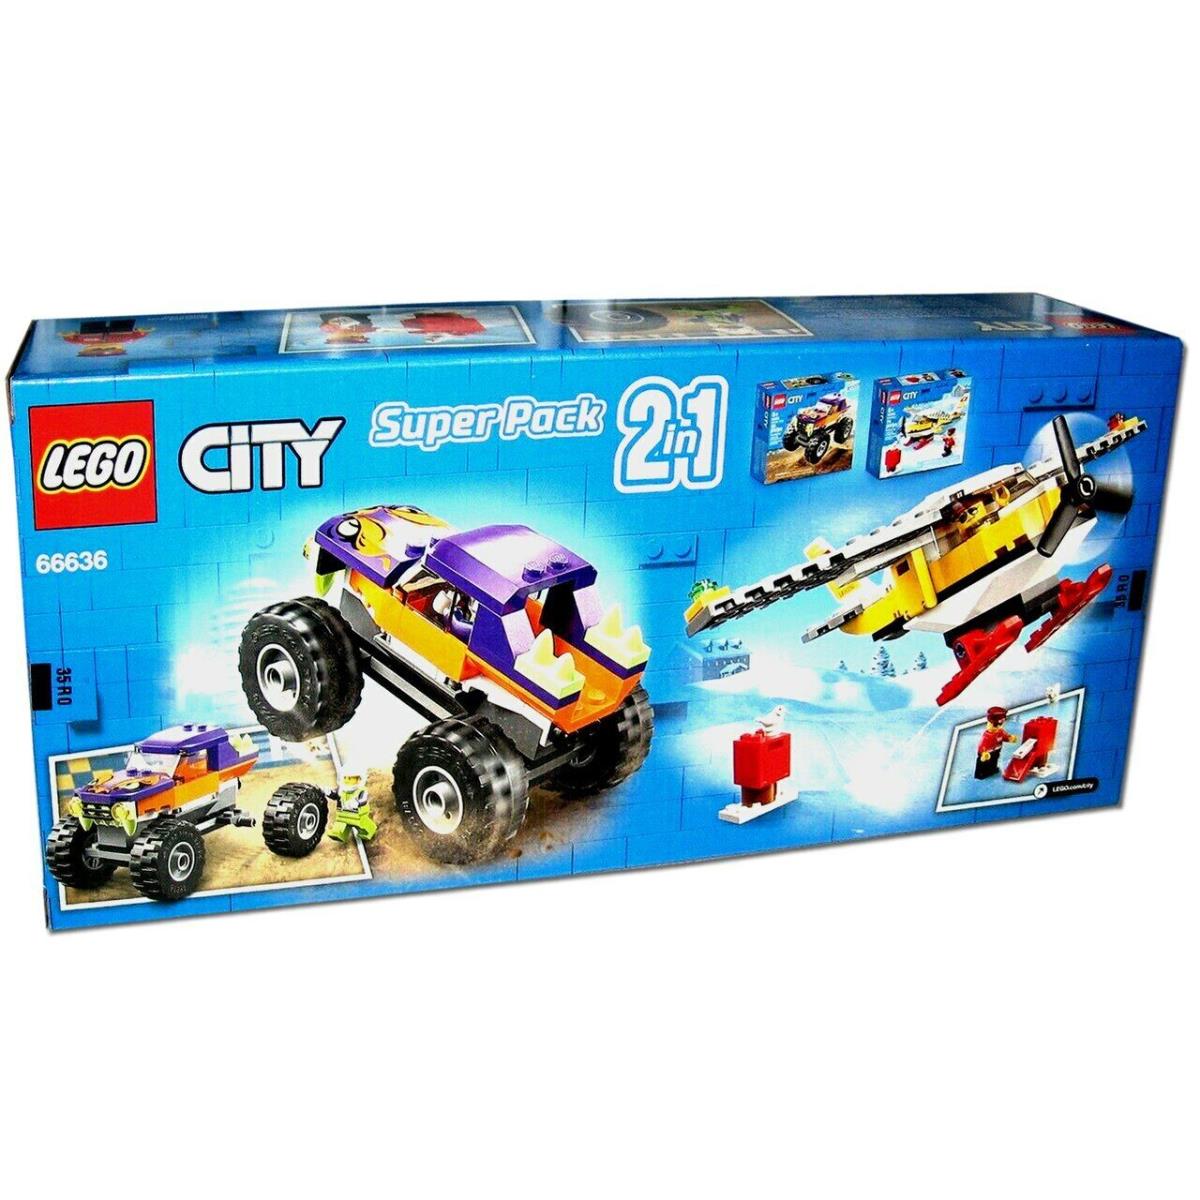 Lego City Super Pack 2-in-1 66636 Buiding Toy For Kids Truck Plane 129 Pieces